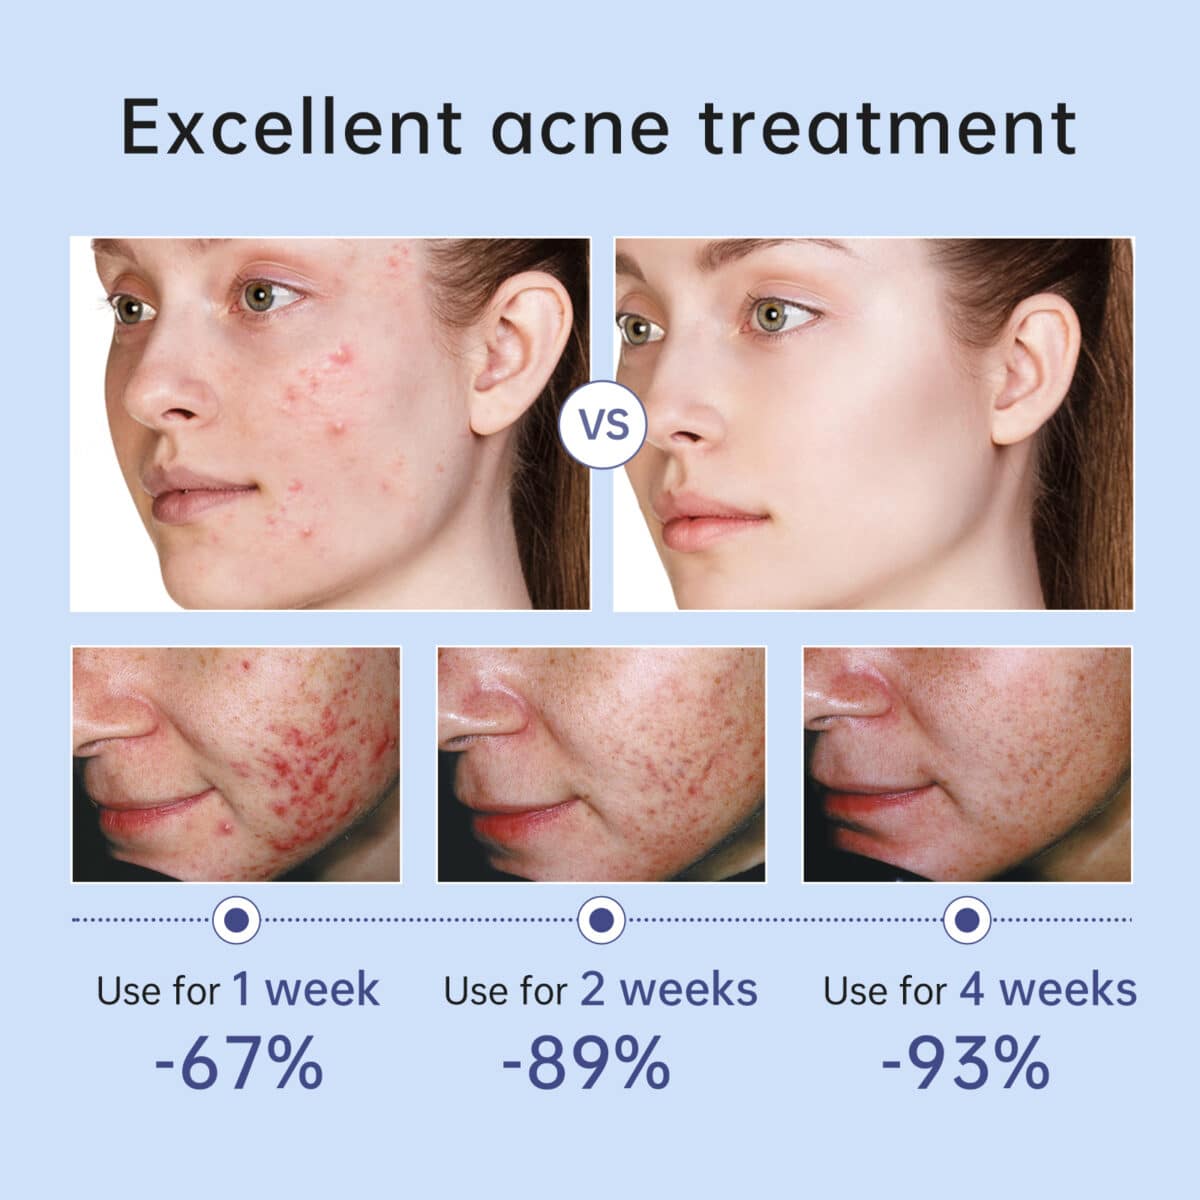 Auquest-herbal-acne-treatment-cream-pimple-spot-removal-for-teens-oil-control-acne-scar-gel-shrink-5